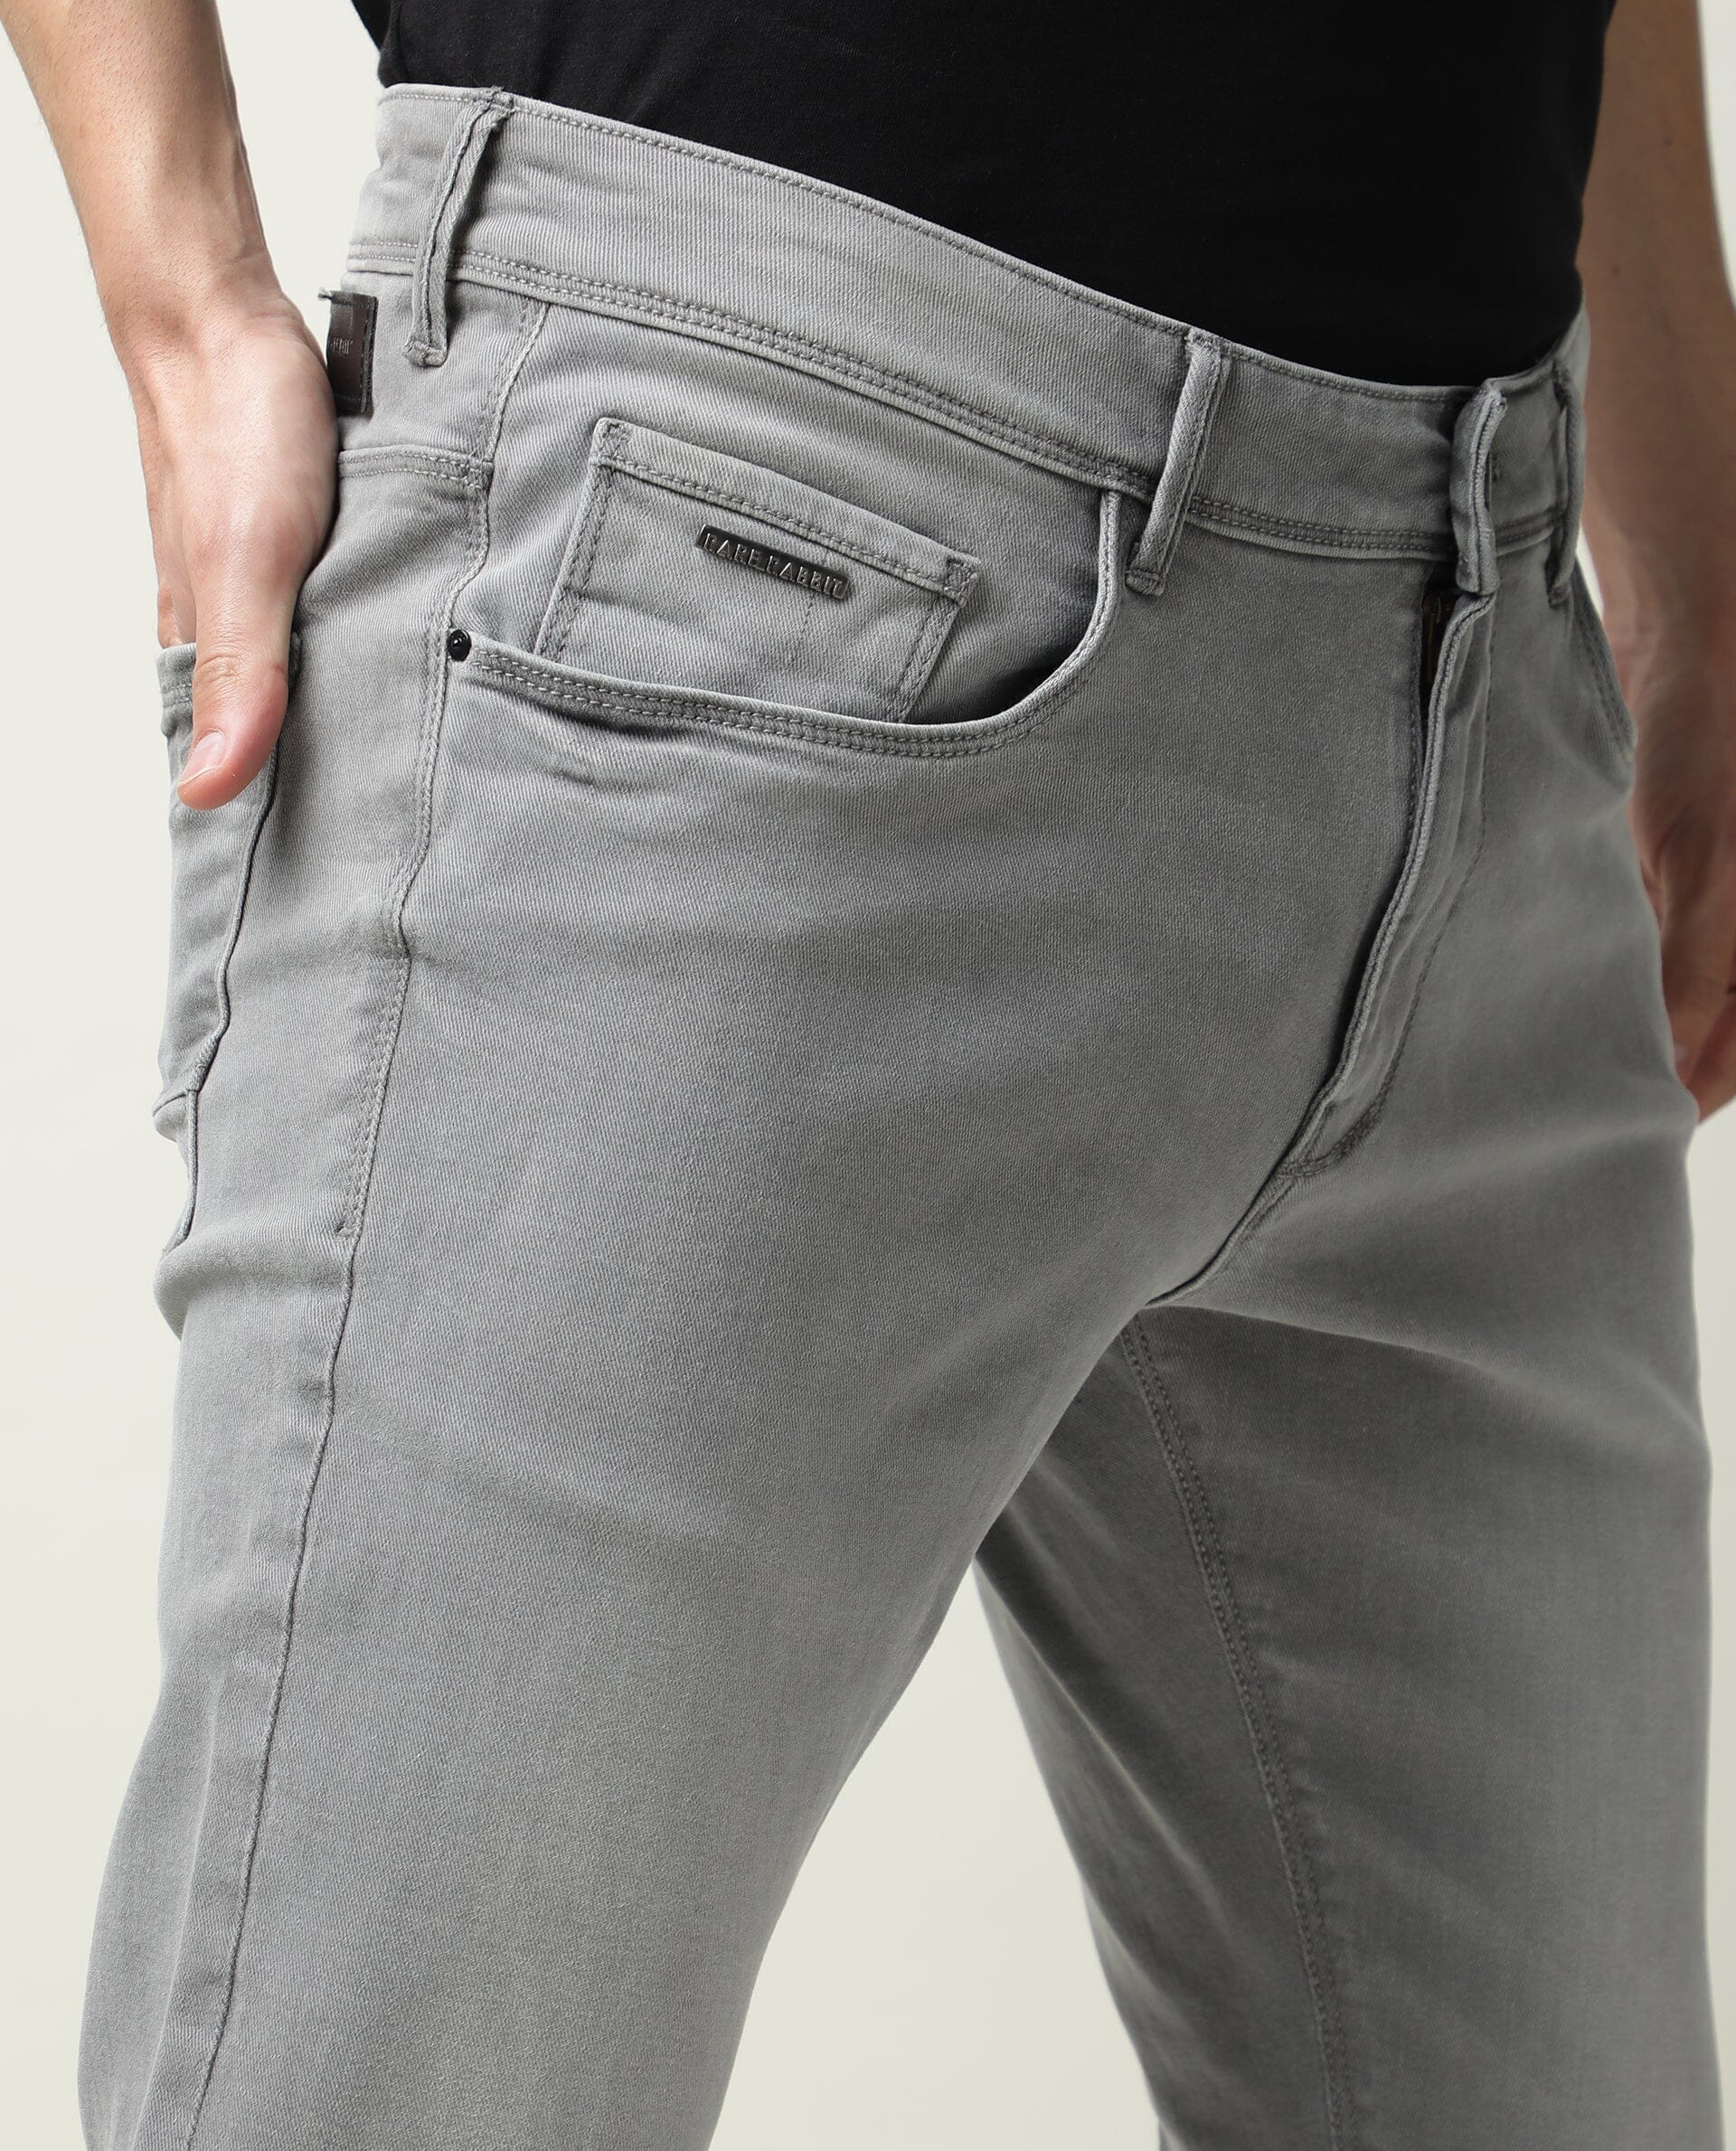 These Butt Zipper Jeans From Vetements x Levis Are The Latest Bizarre Take  On Denim